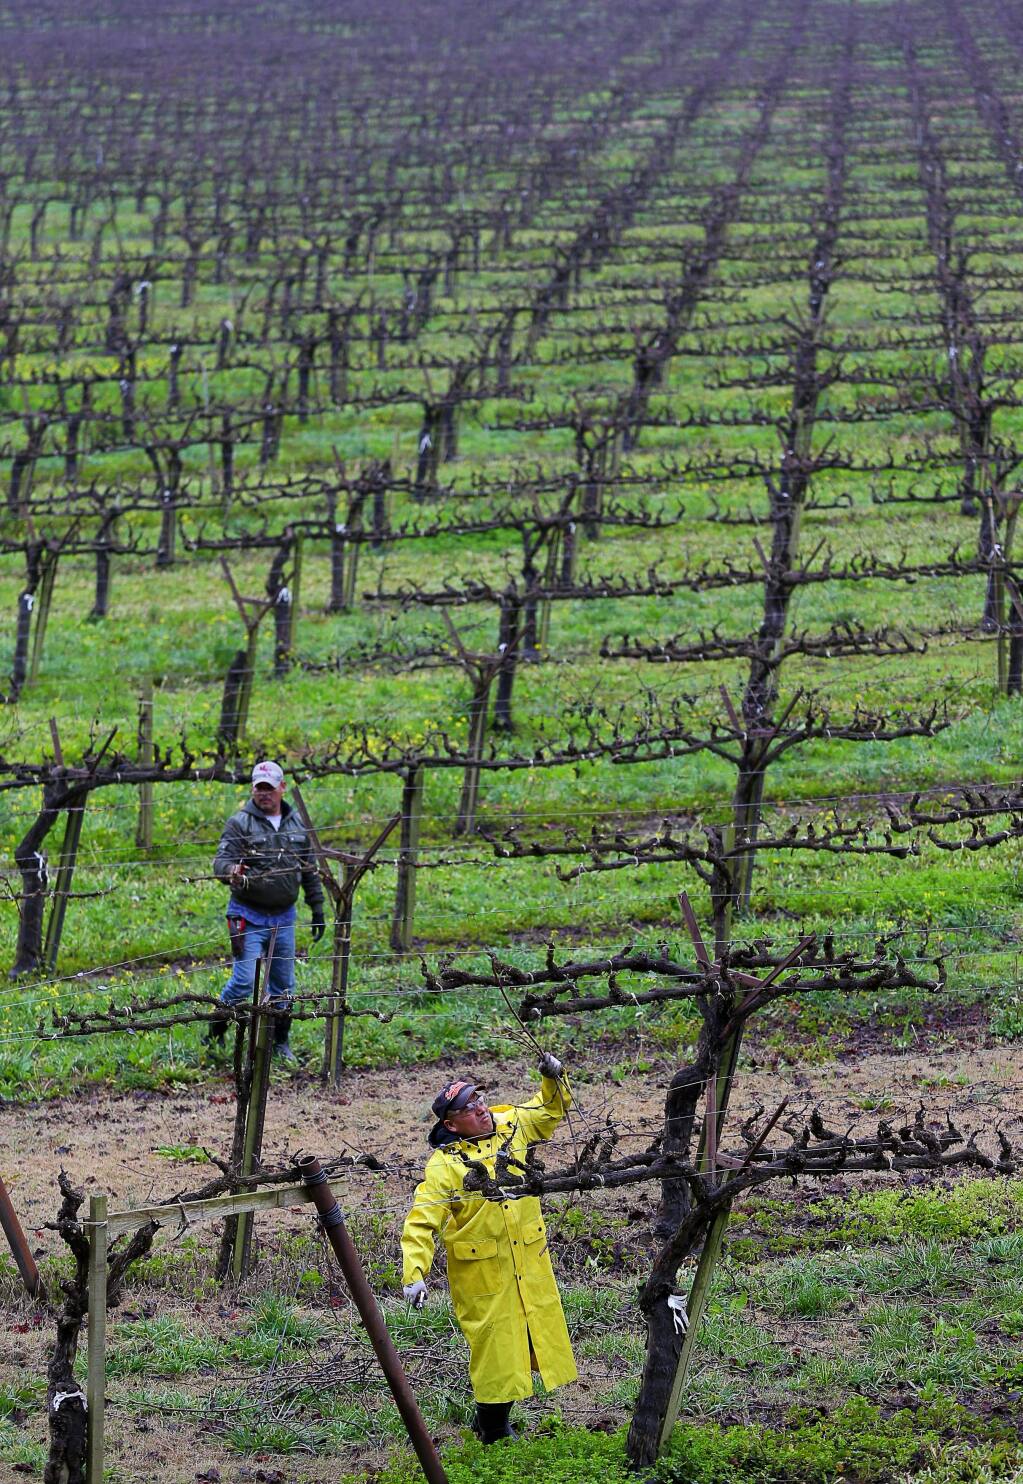 Workers prune vines in a vineyard along River Road across from Korbel Champagne Cellars on Monday, Jan. 11, 2016. (Christopher Chung / The Press Democrat)